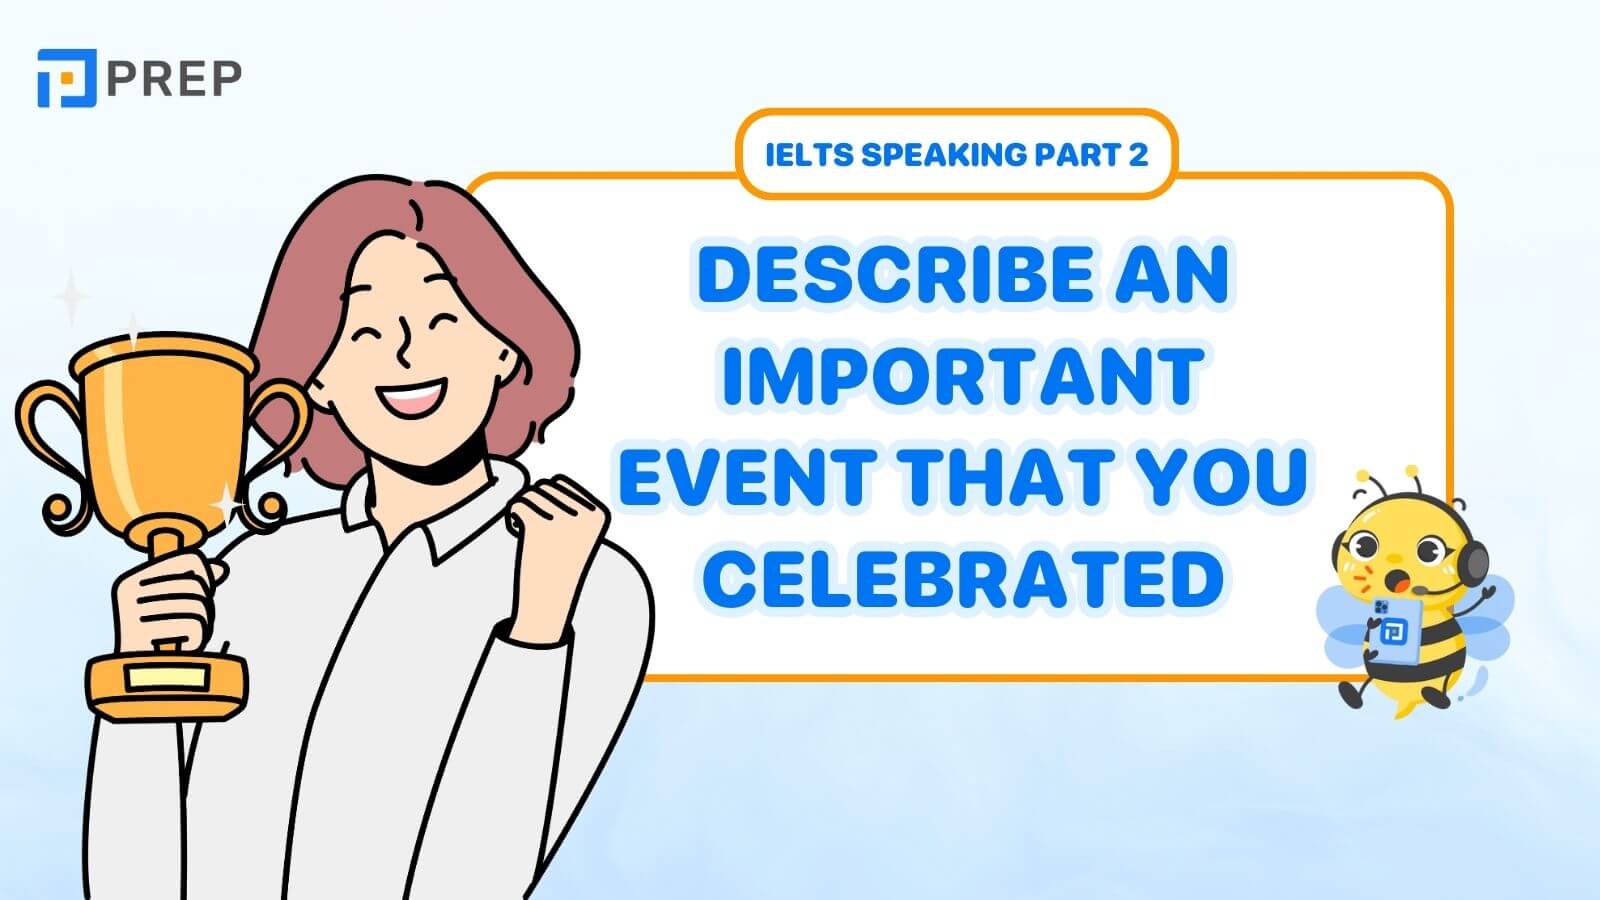 Describe an important event that you celebrate